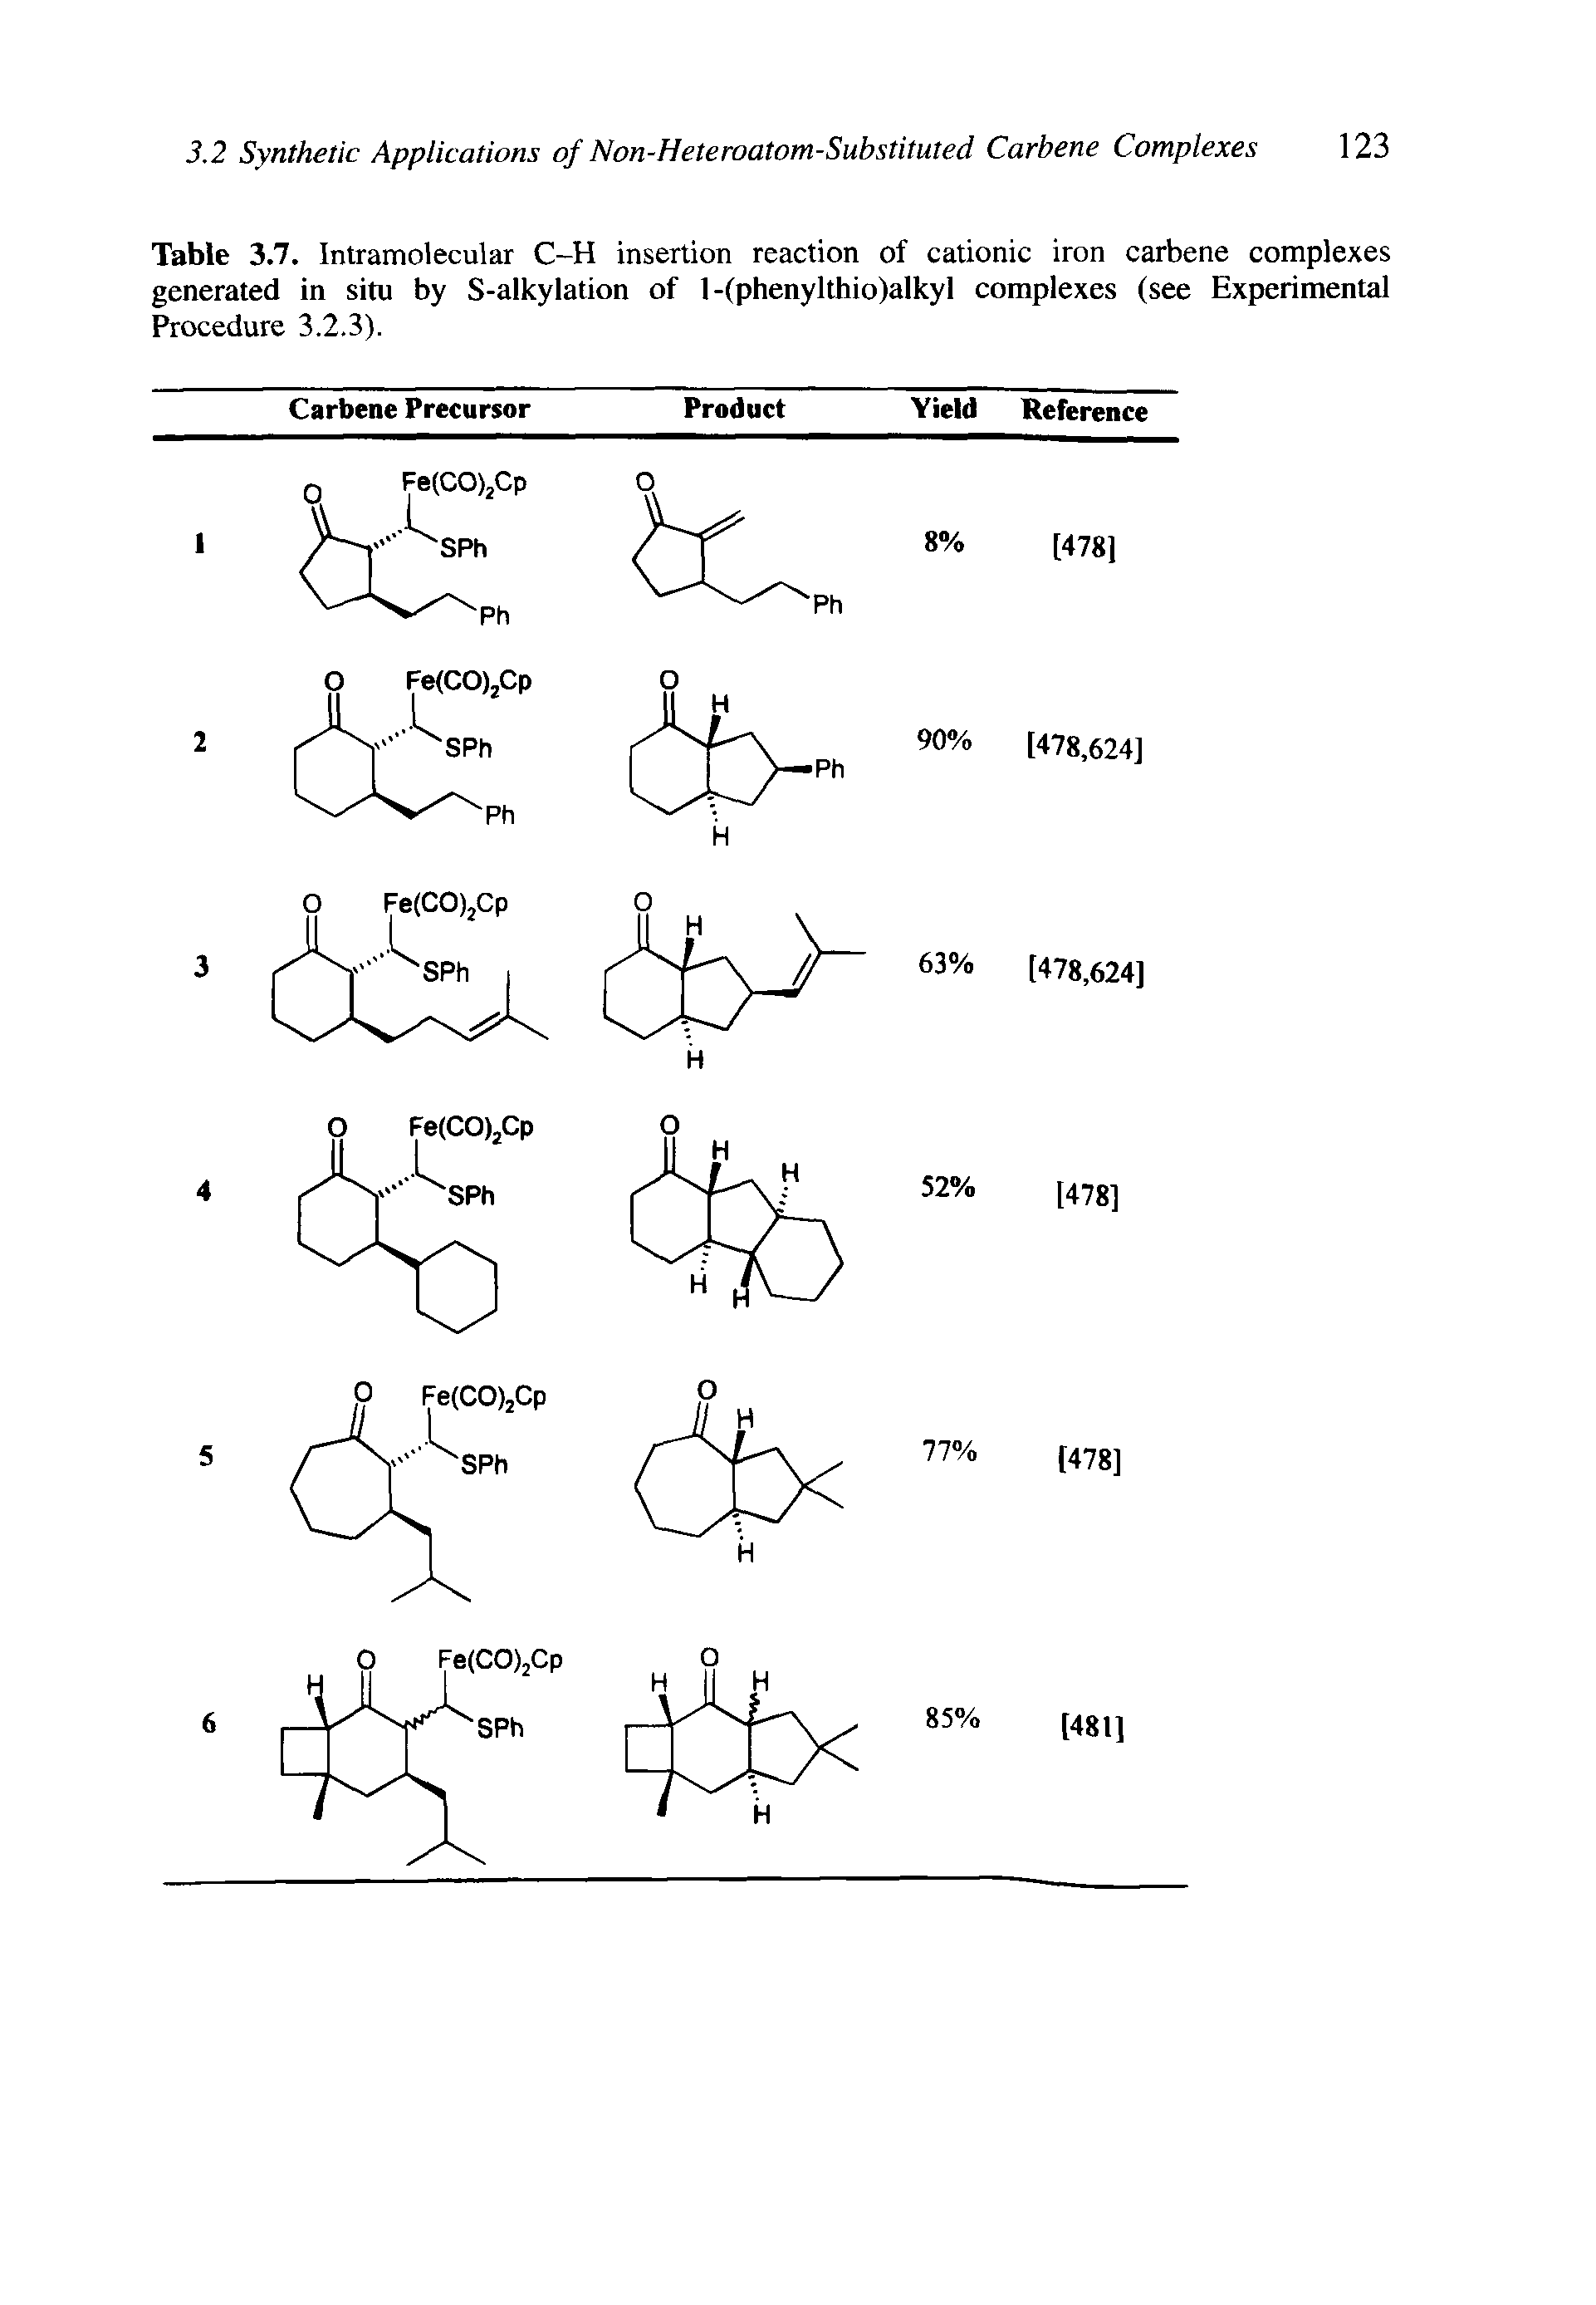 Table 3.7. Intramolecular C-H insertion reaction of cationic iron carbene complexes generated in situ by S-alkylation of 1-(phenylthio)alkyl complexes (see Experimental Procedure 3.2.3).